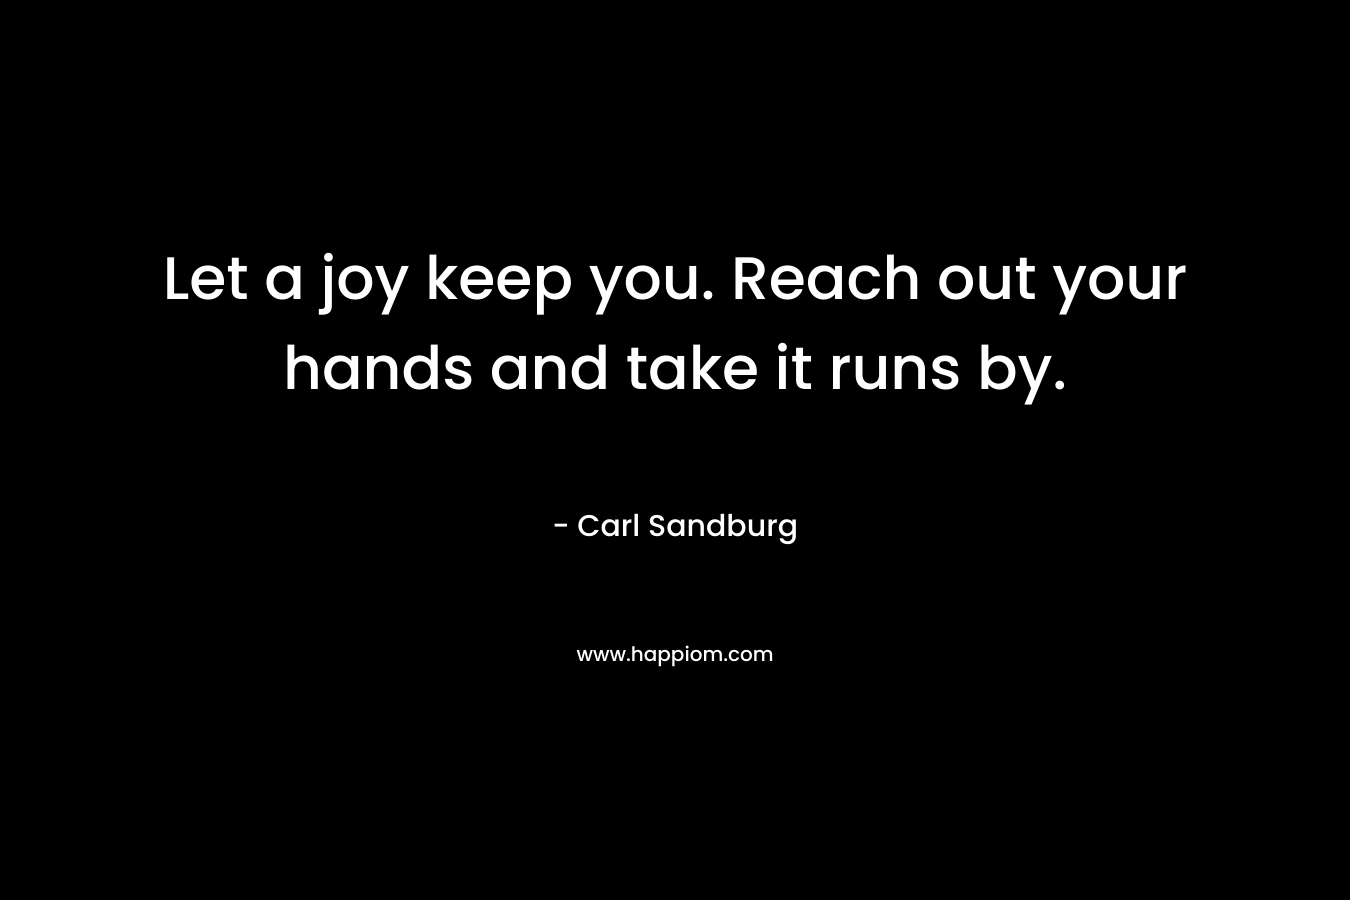 Let a joy keep you. Reach out your hands and take it runs by.